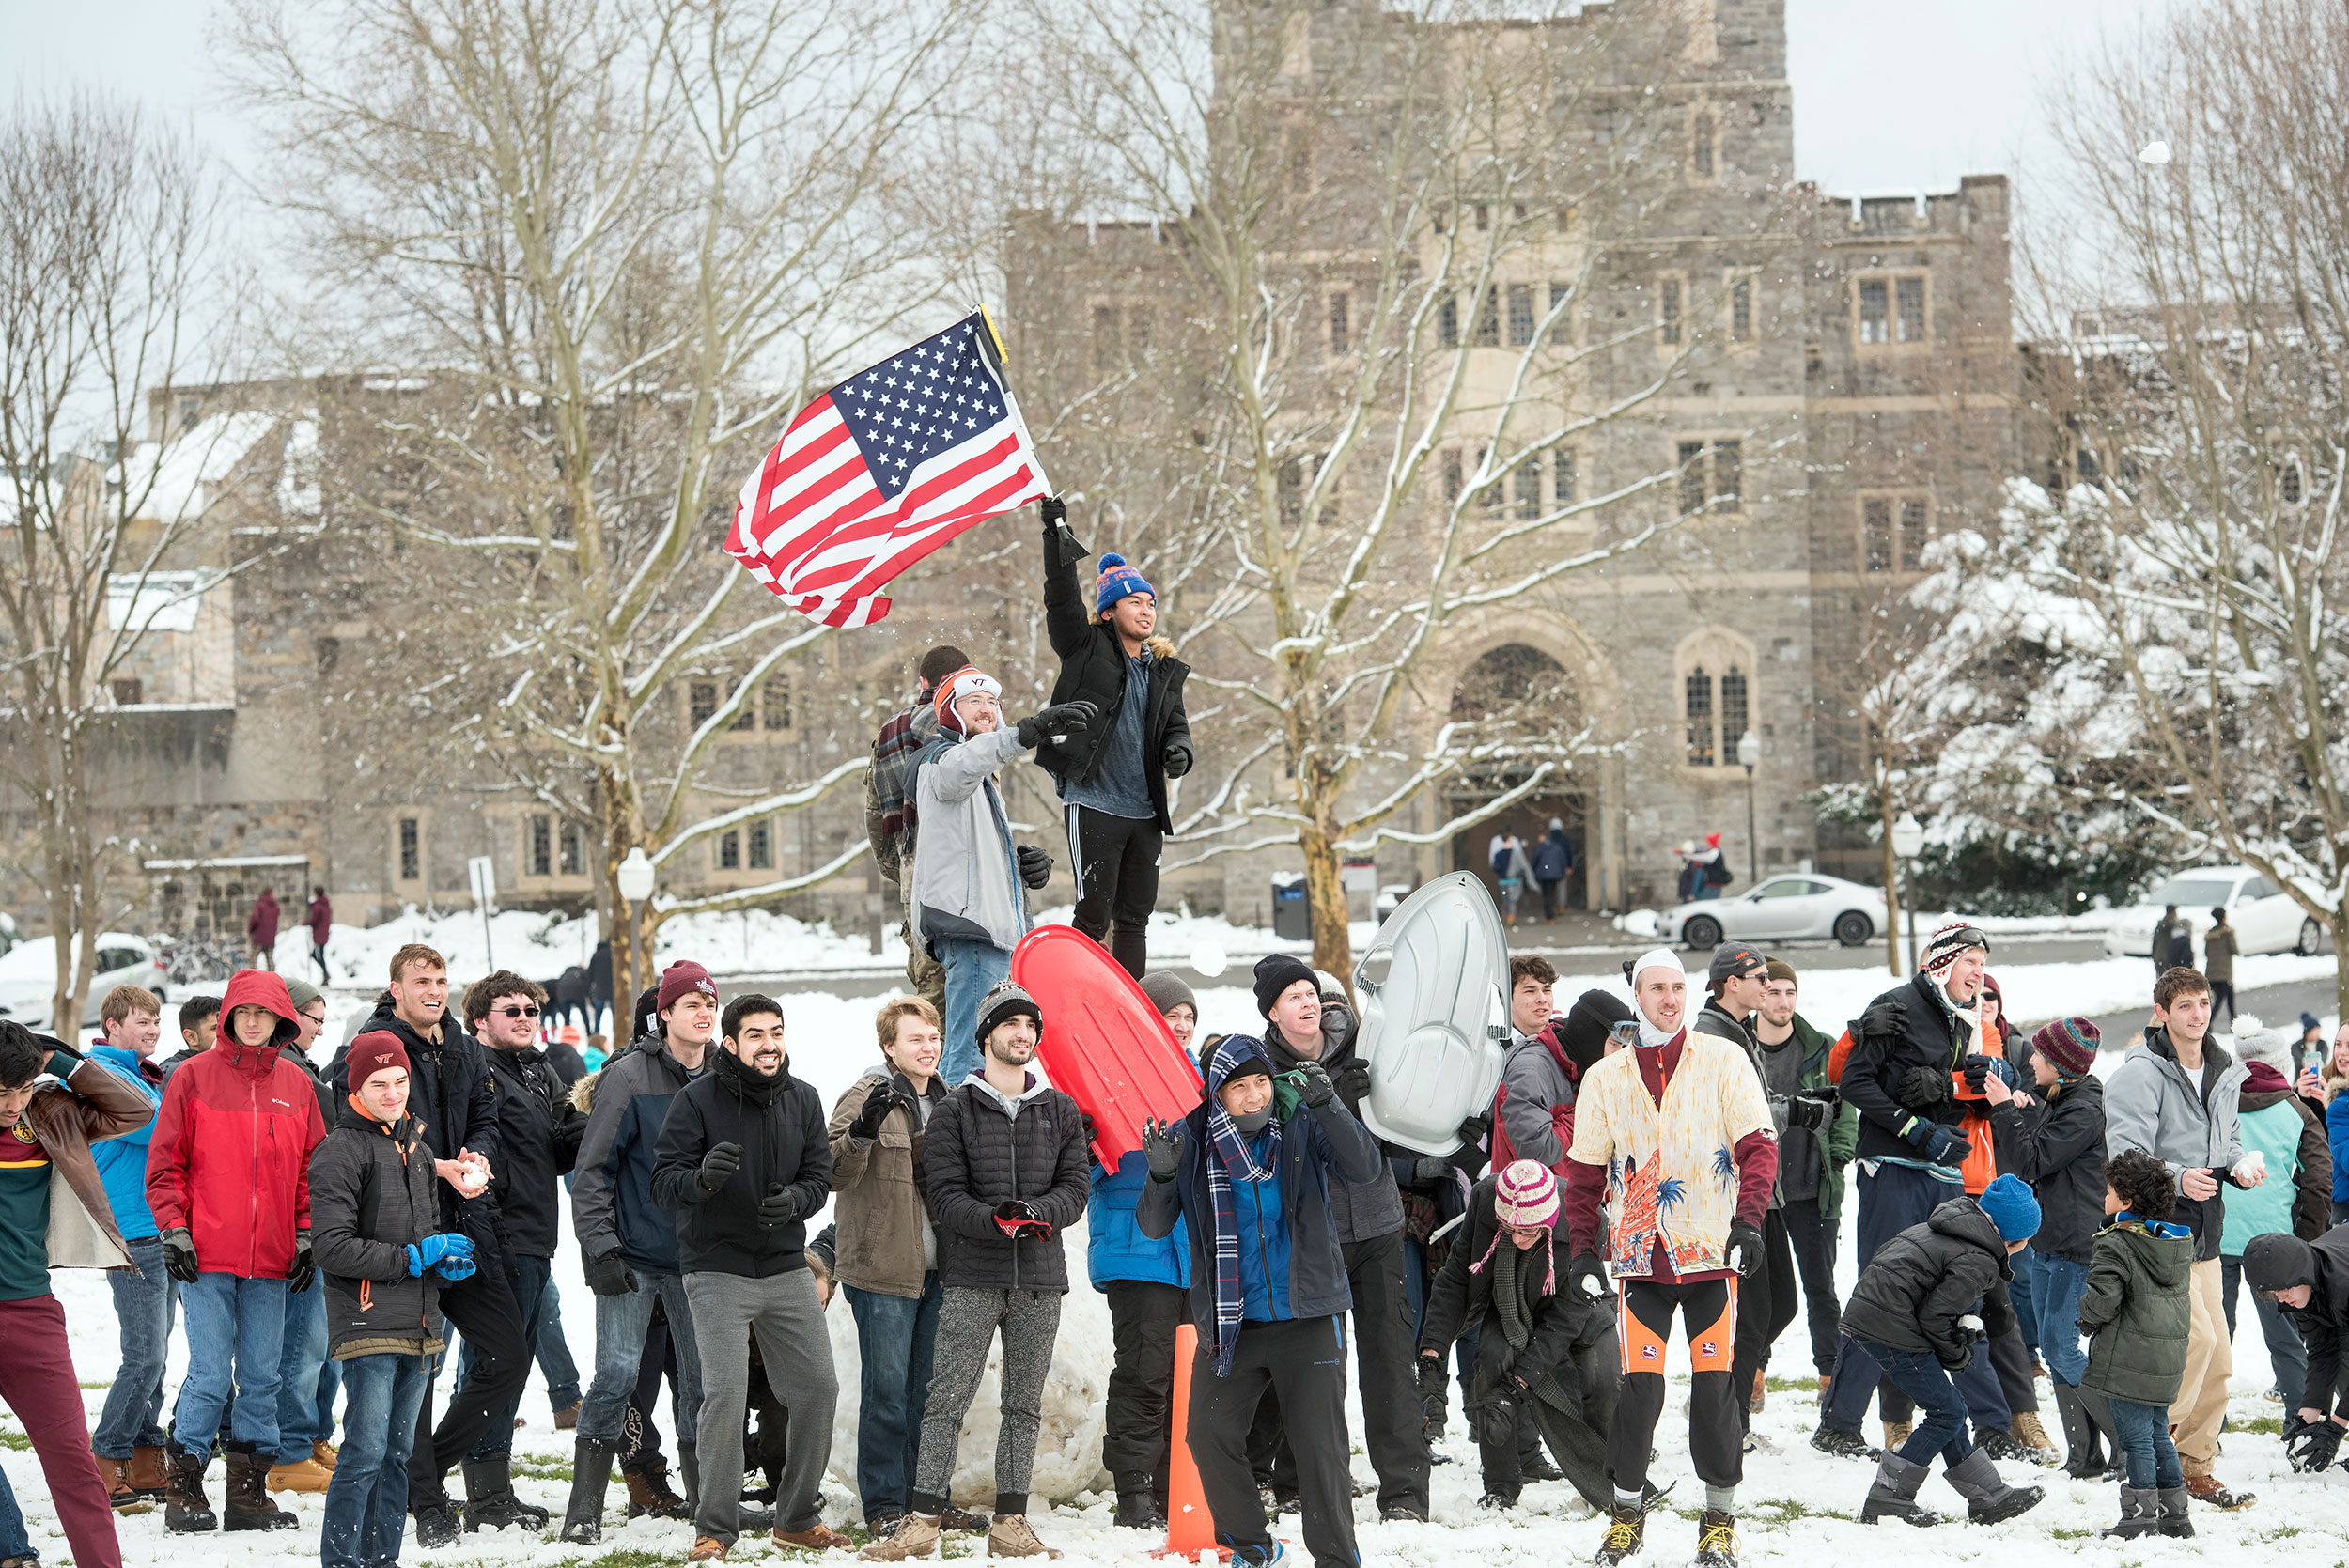 Students playing in the snow on the Drillfield.